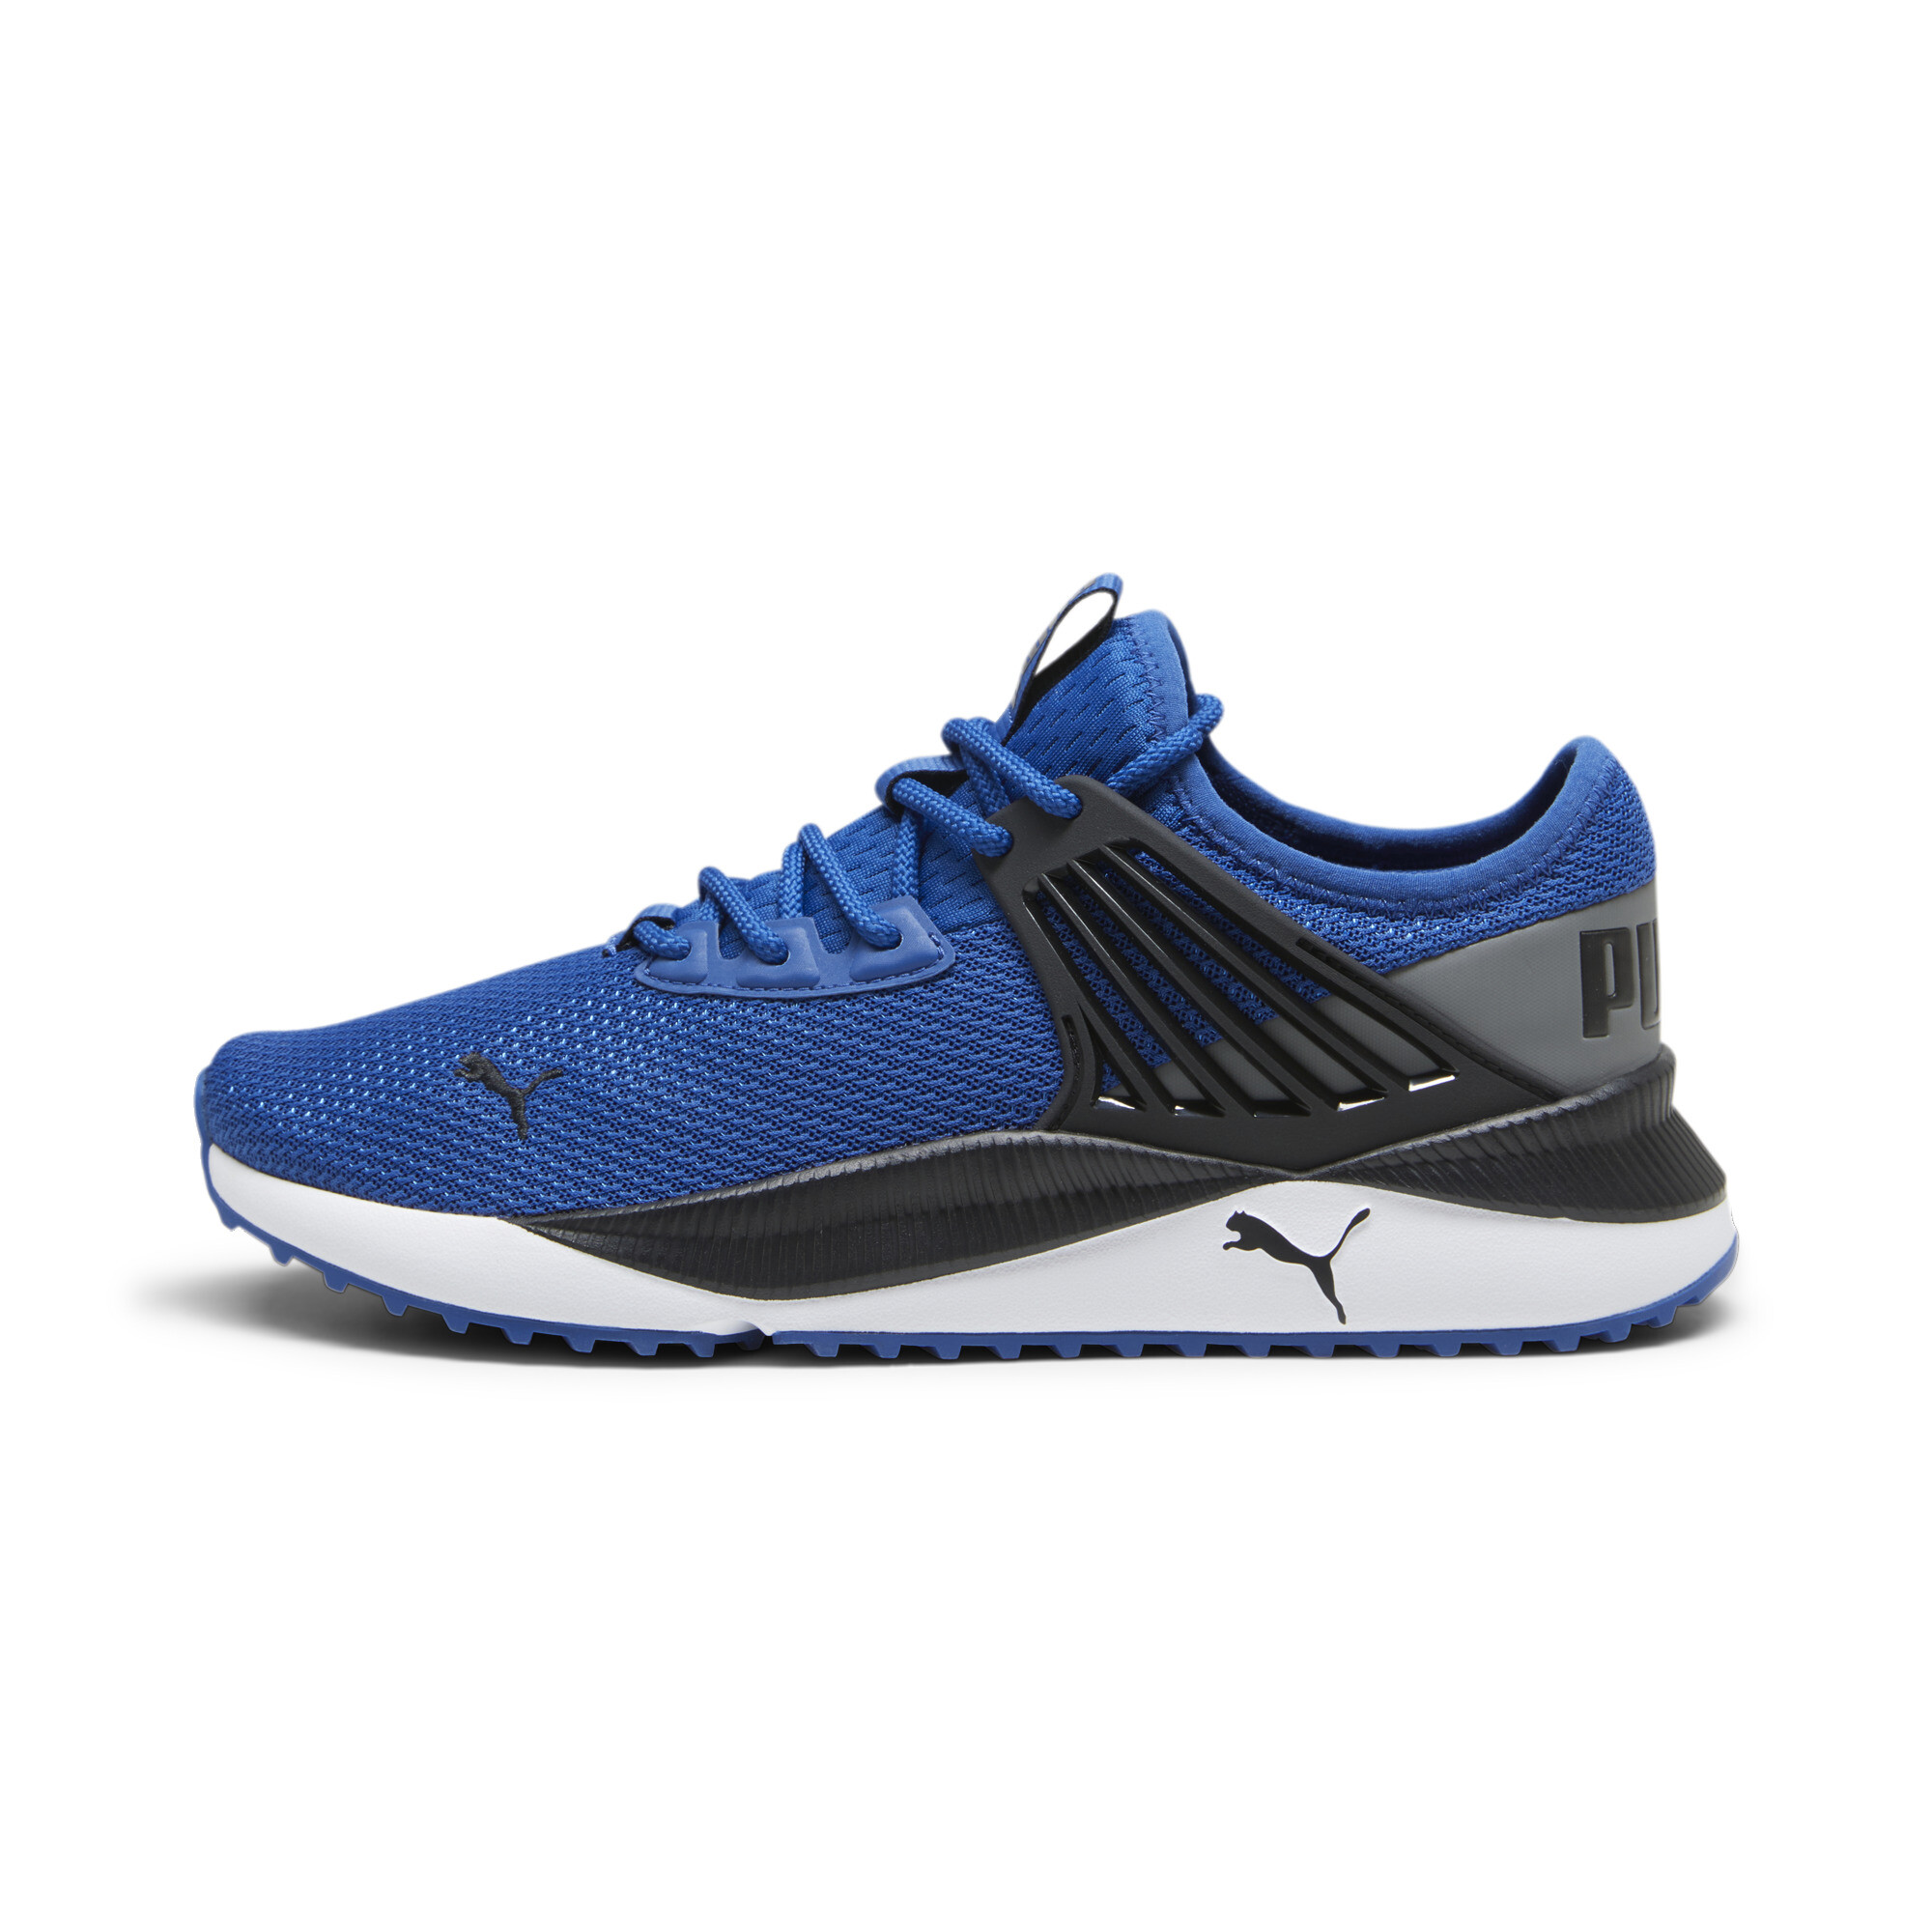 All Sizes):- Zudio Black Training Shoes at Just Rs. 299 + Free